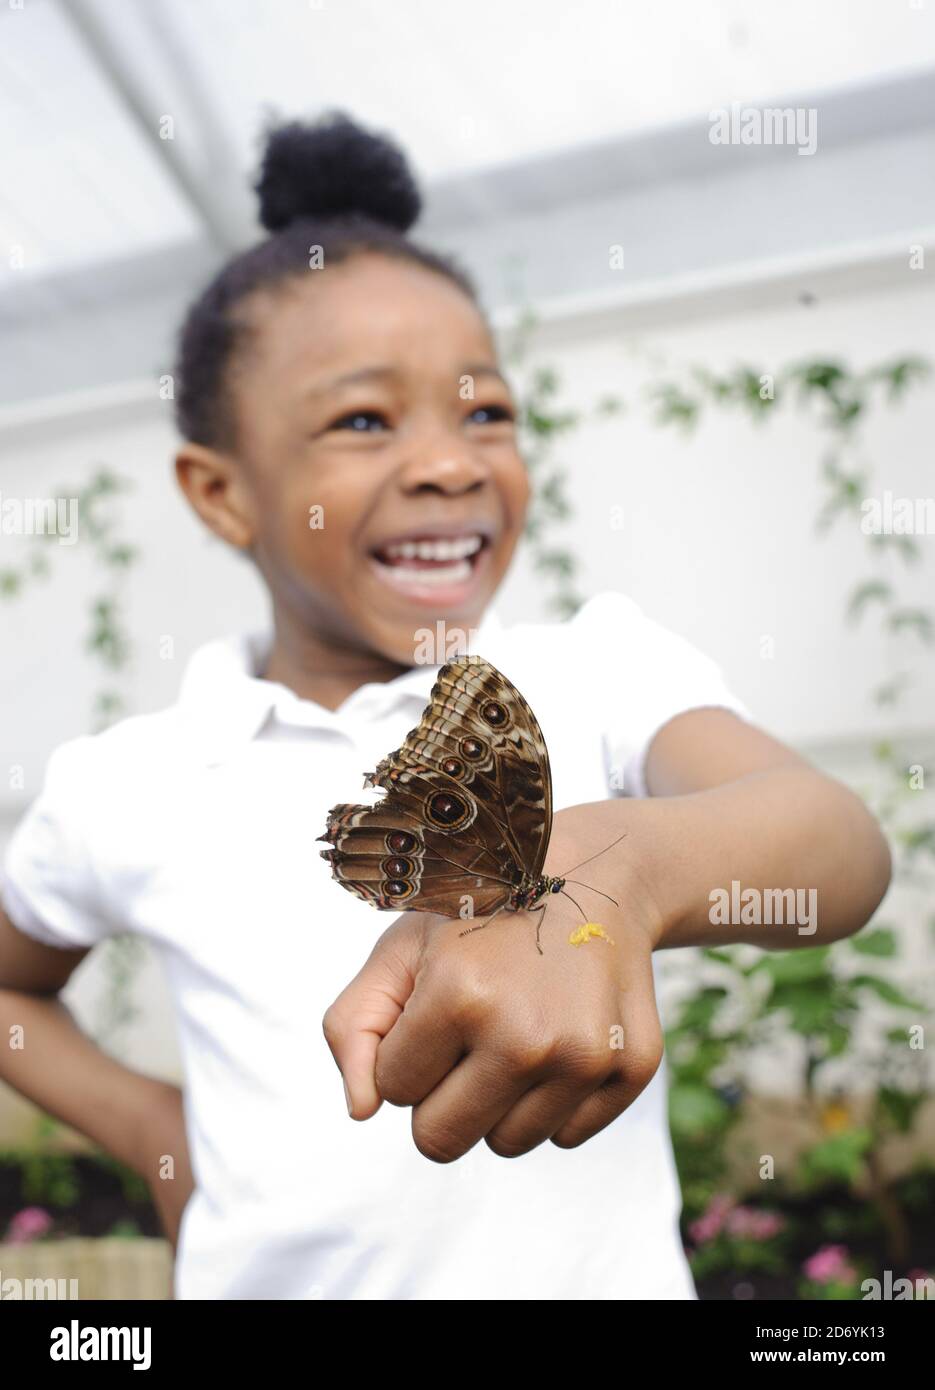 Year 1 pupil Lovetta, from the Nightingale Primary school in Hackney, pictured at 'Sensational Butterflies', a new exhibition featuring hundreds of tropical butterflies at the National History Museum in south Kensington, London. Stock Photo